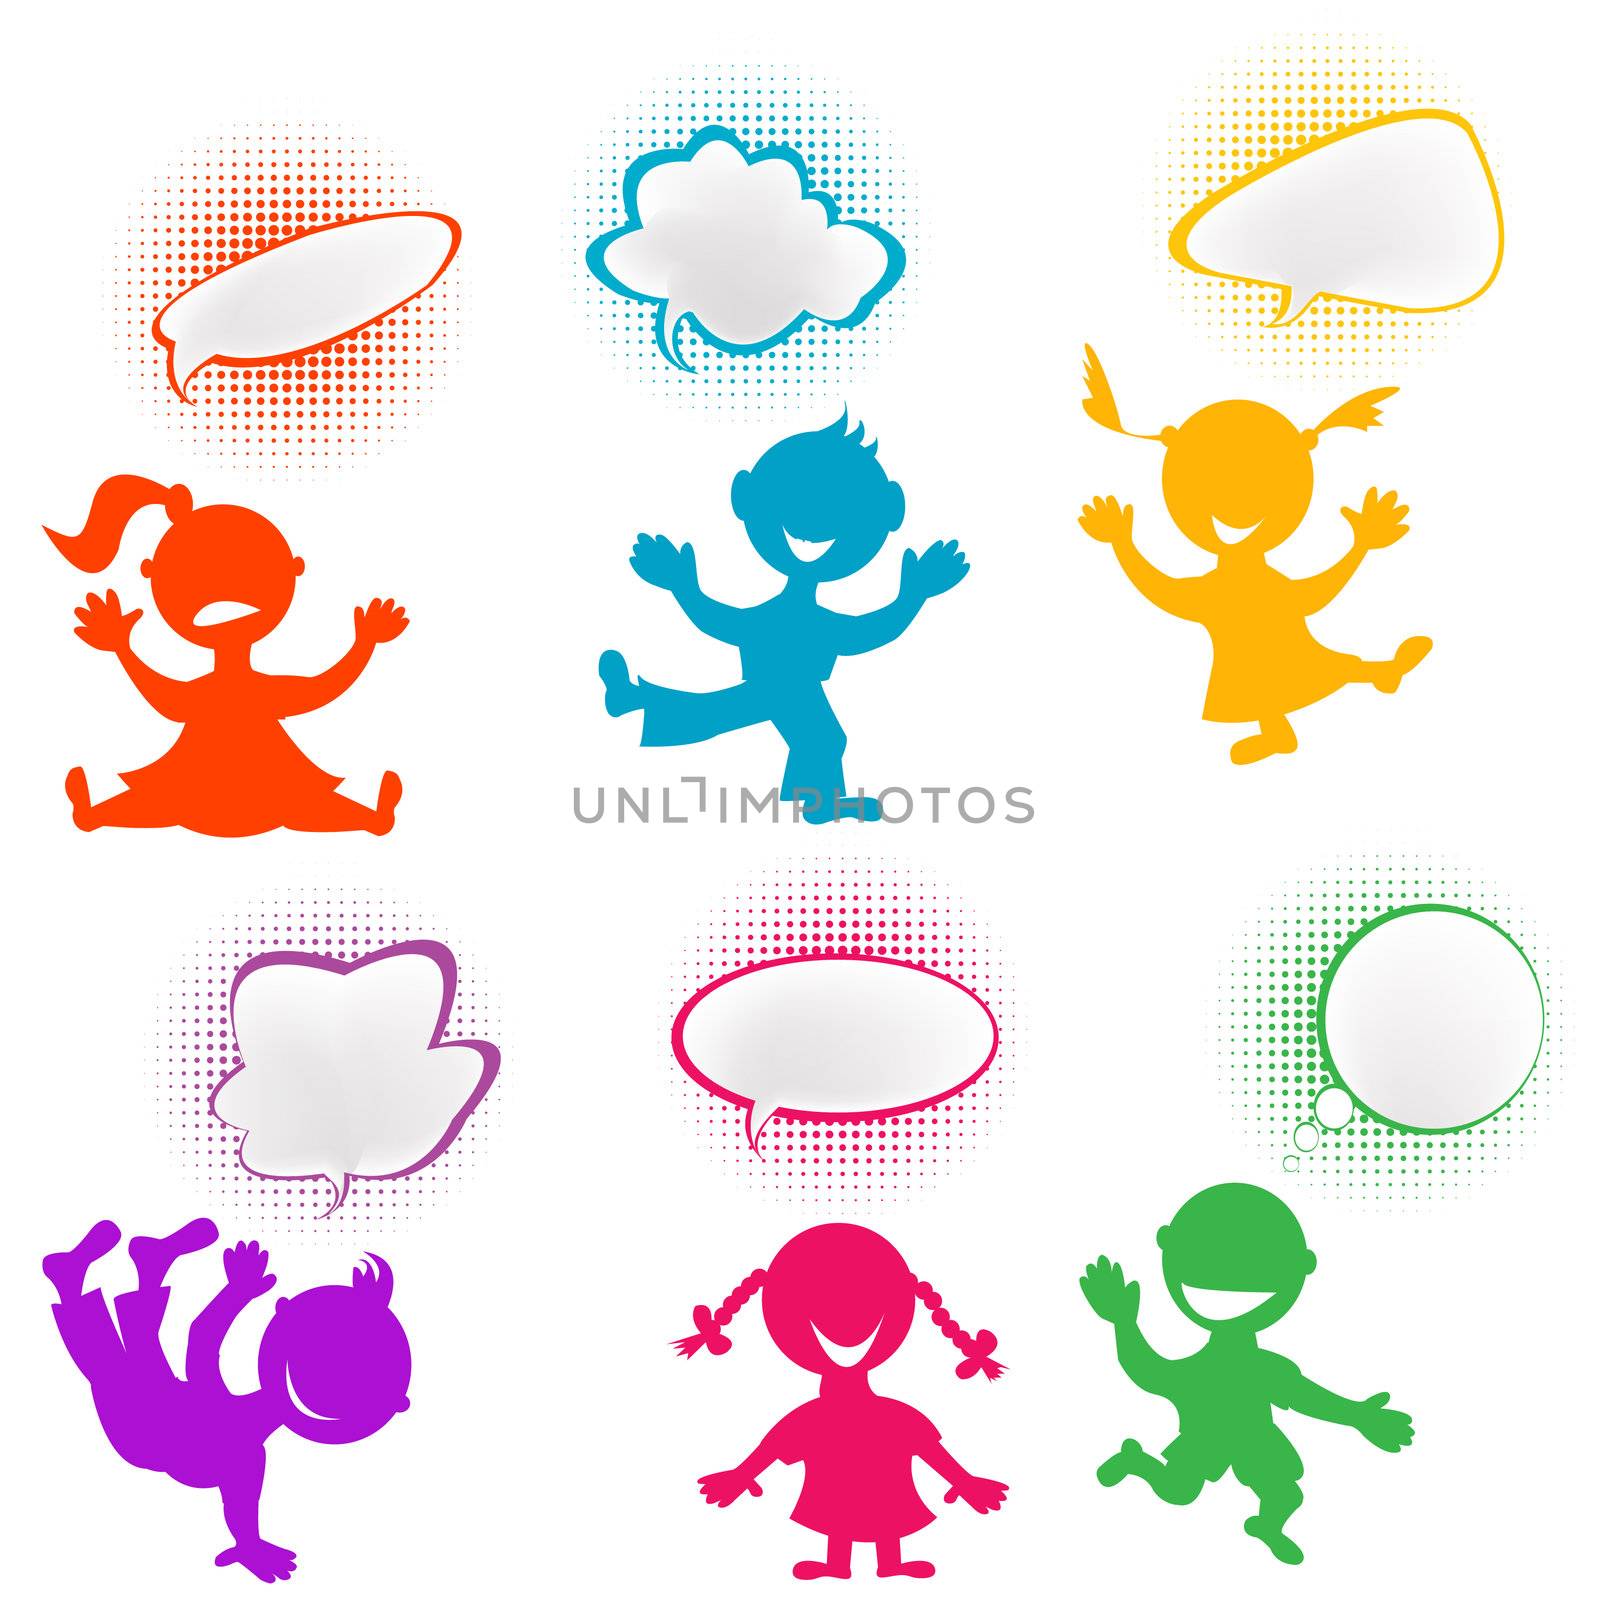 Playful children silhouettes with chat bubbles